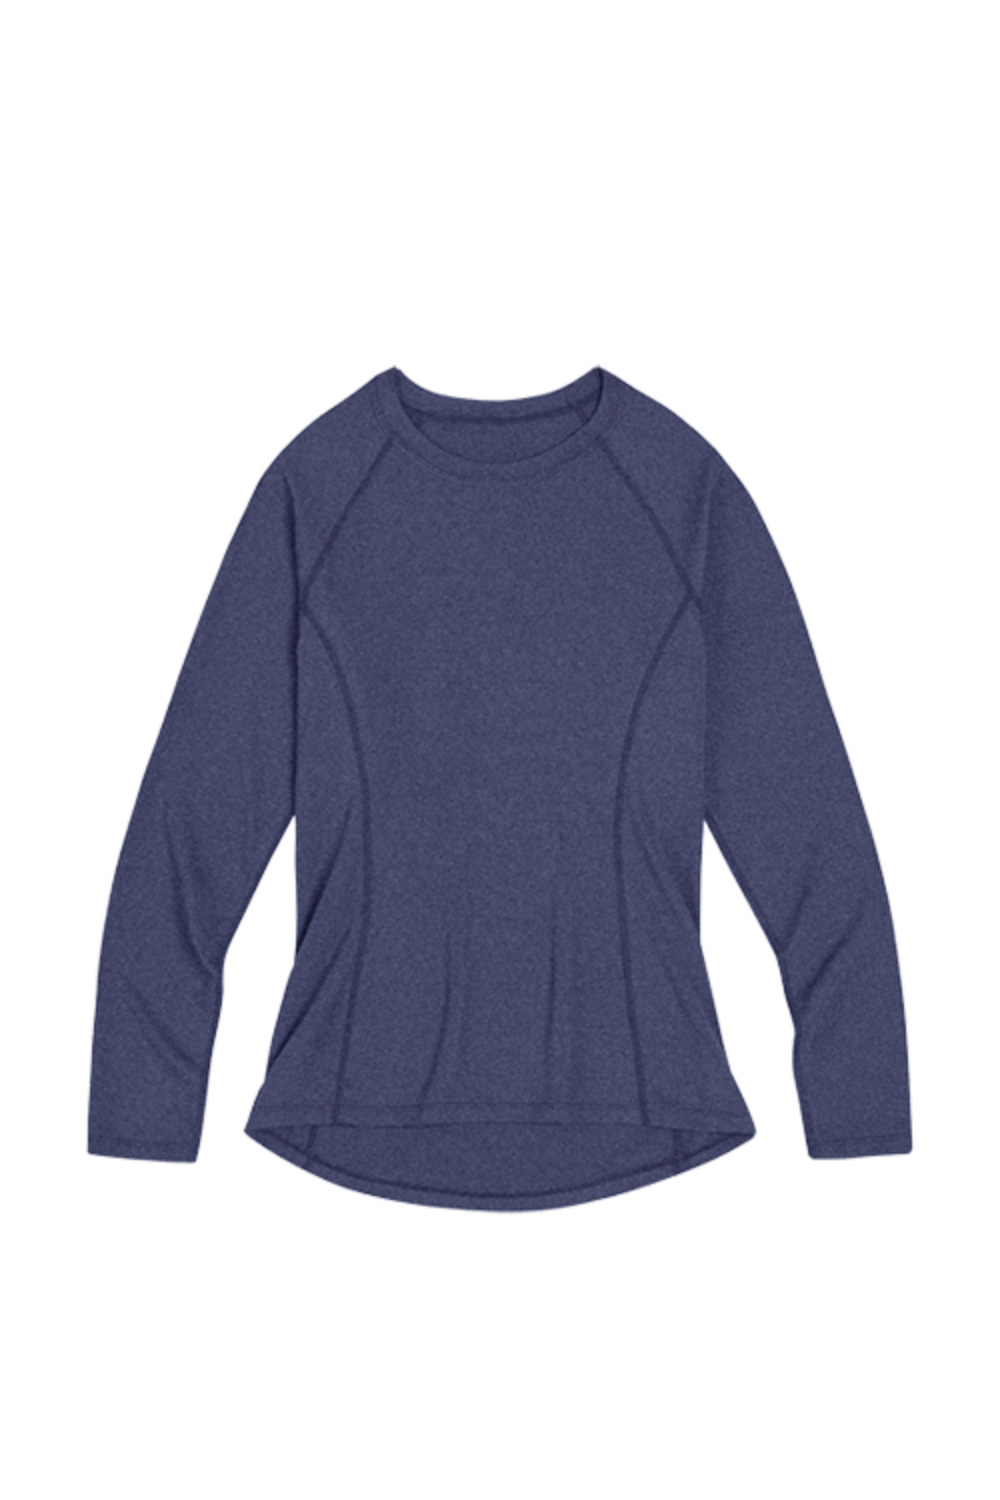 Airtouch Pace Long Sleeve